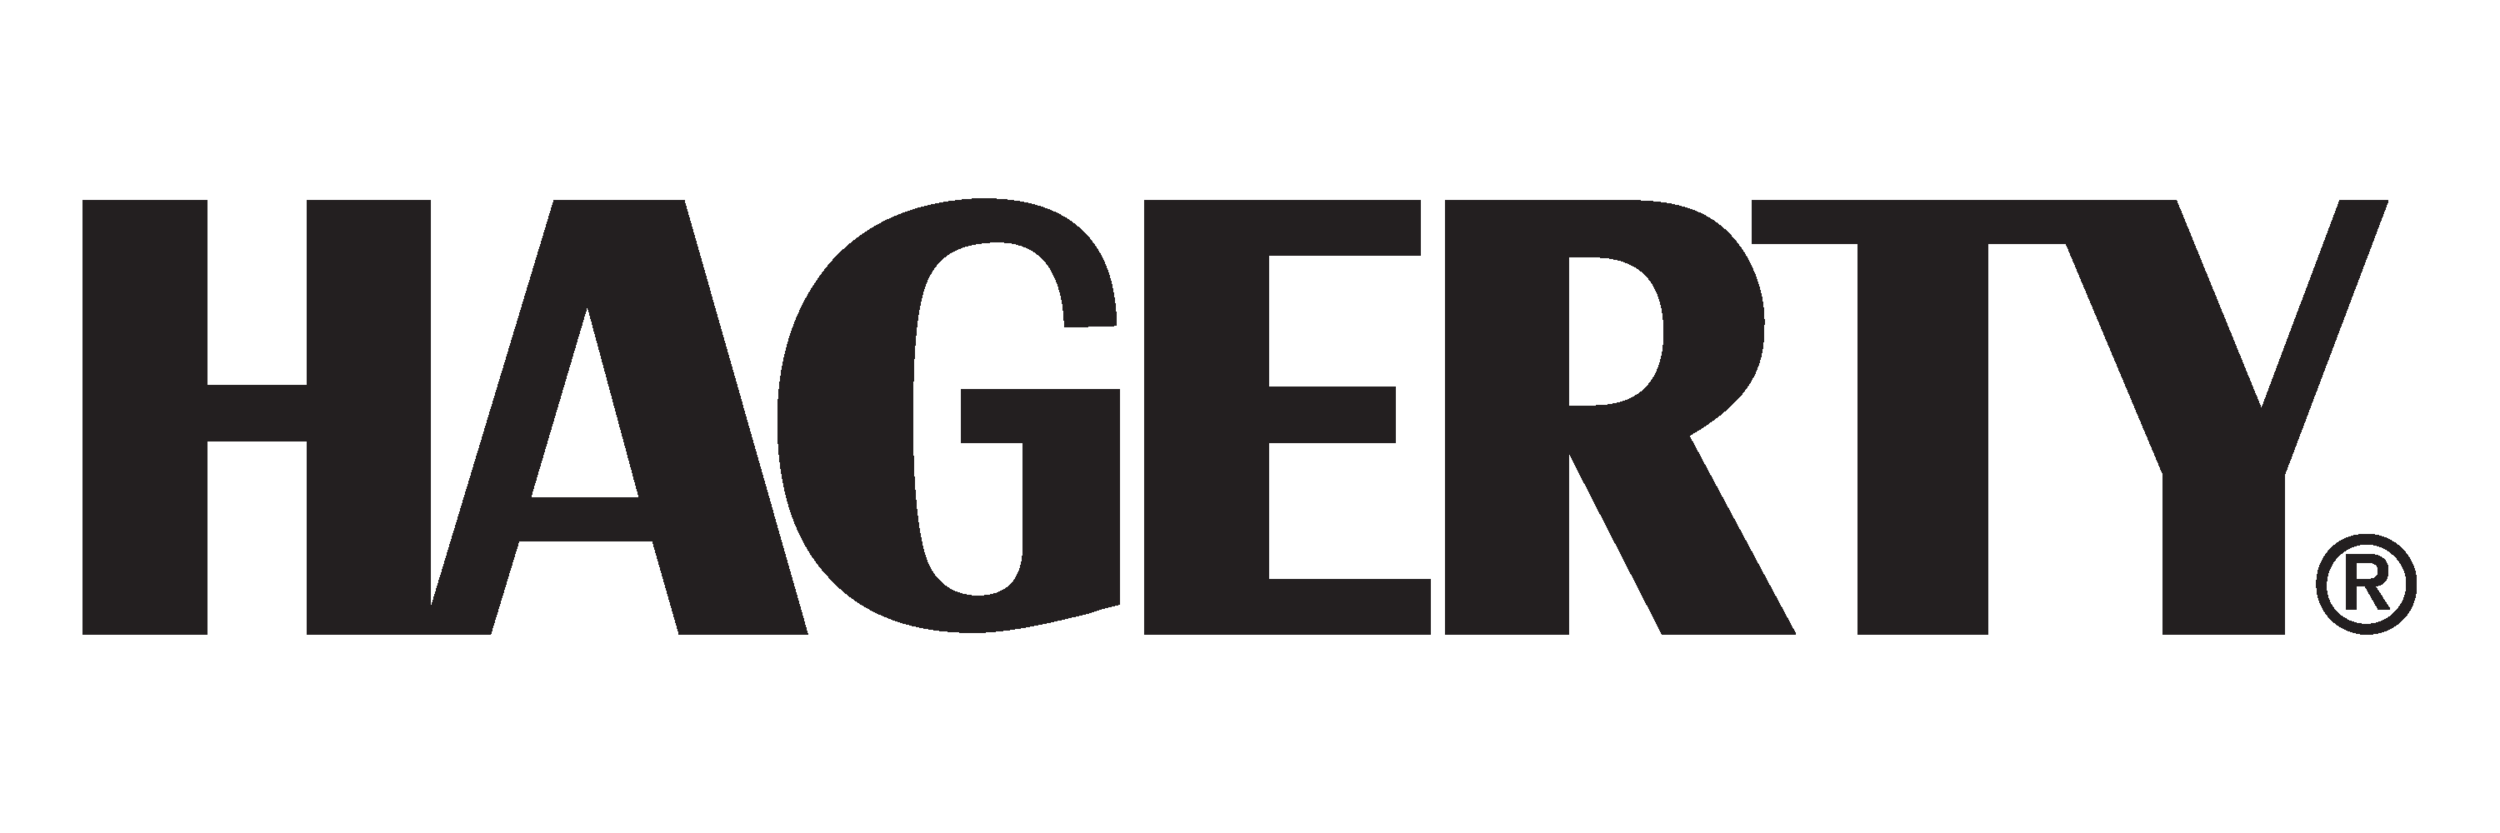 Hagerty-Insurance-Logo.png